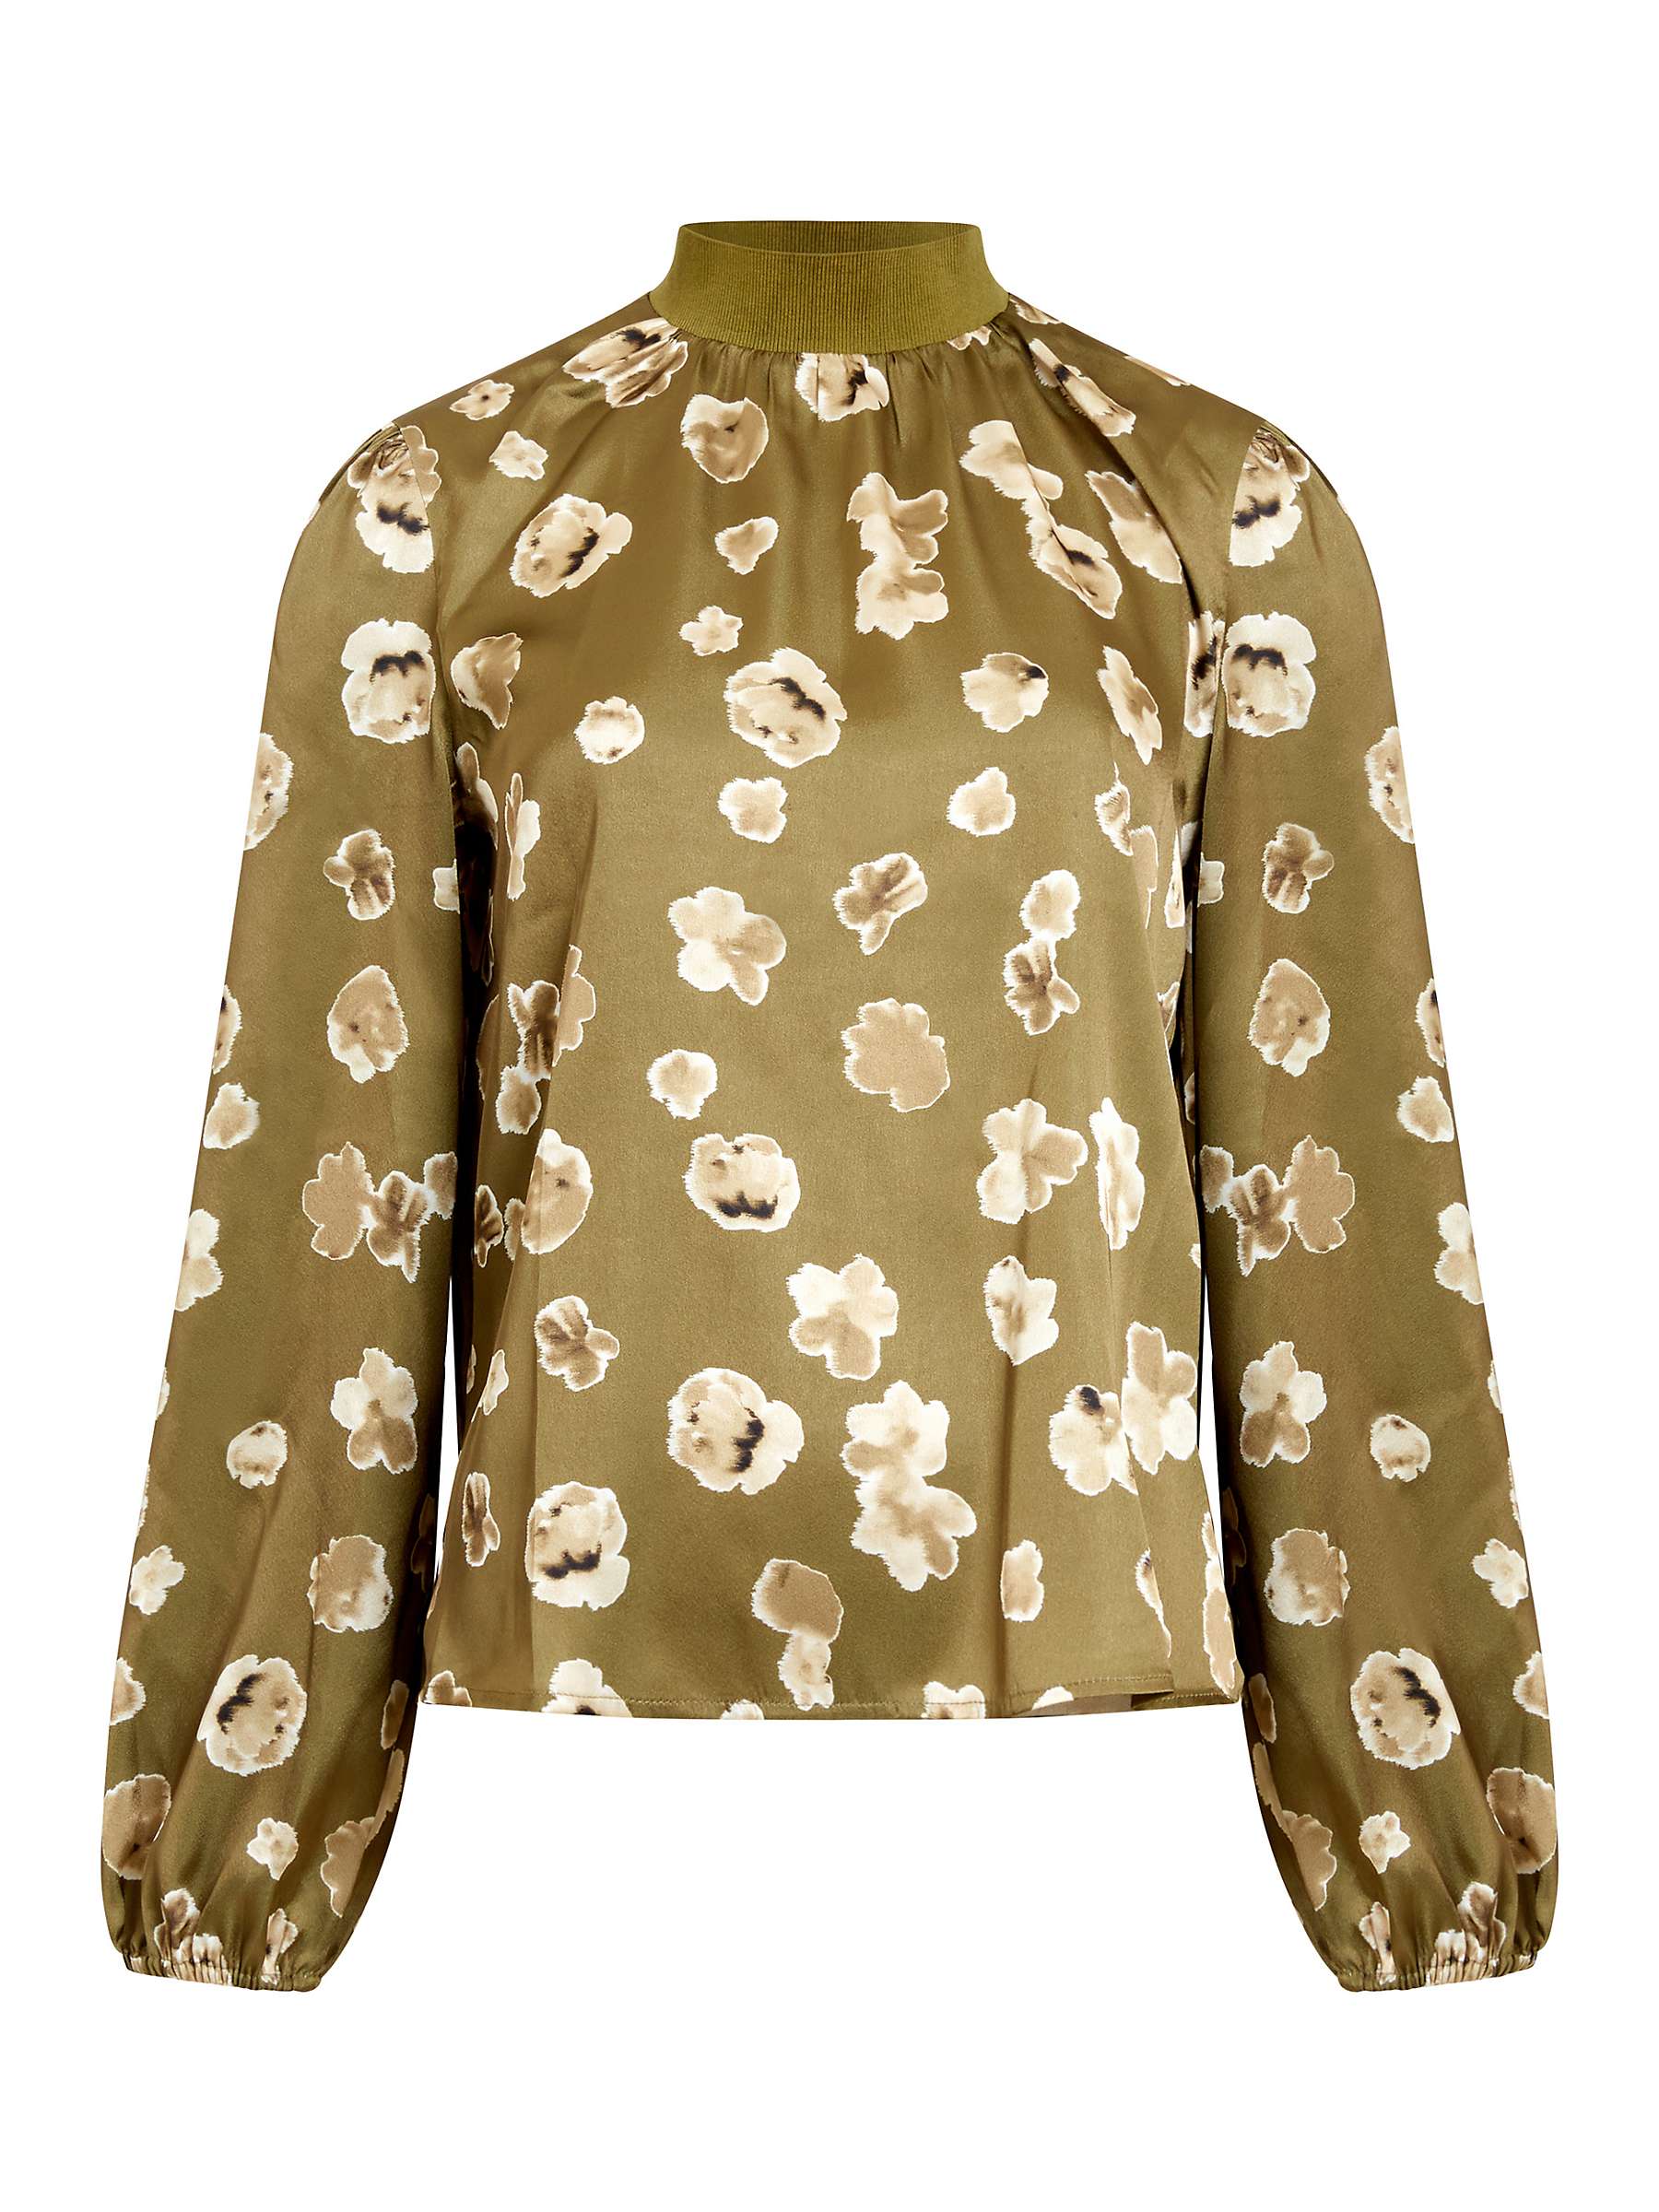 Buy French Connection Bronwen Aleeya High Neck Floral Top, Nutria Online at johnlewis.com